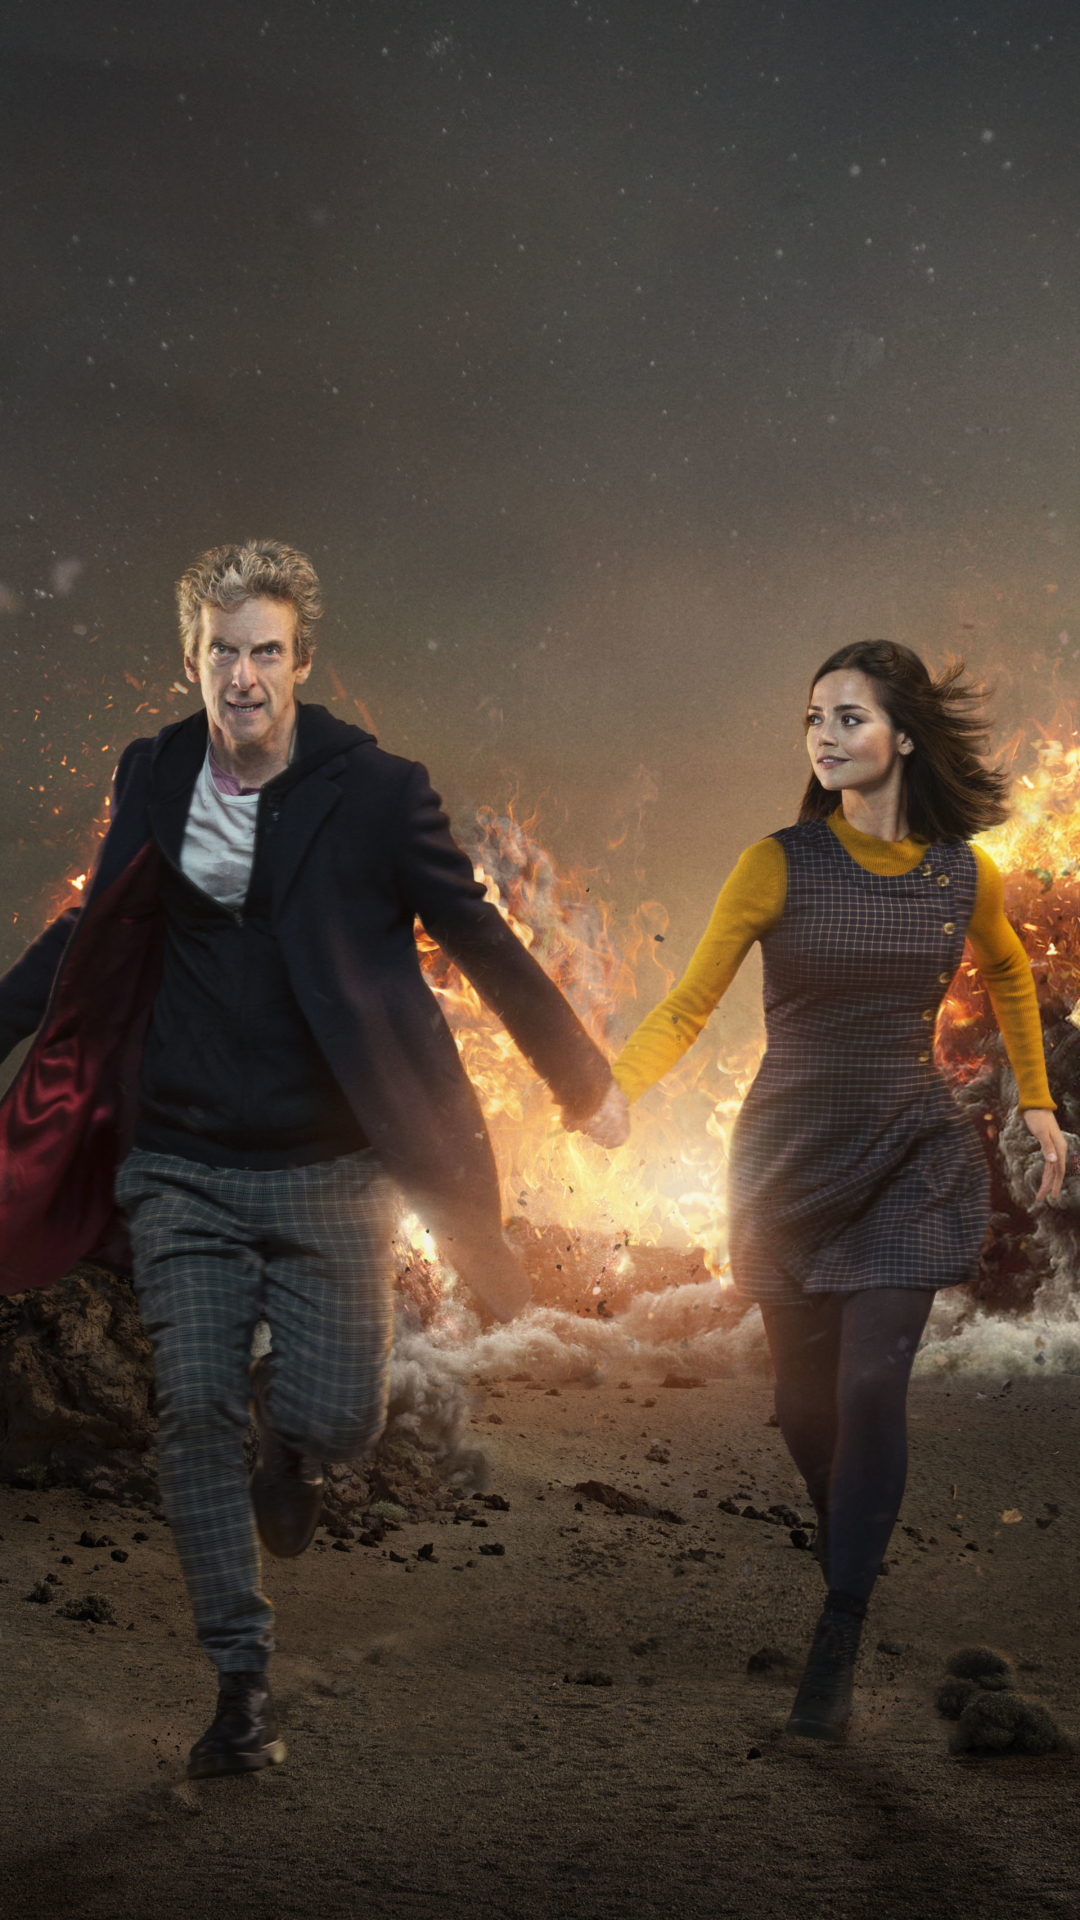 Wallpaper ID 332611  TV Show Doctor Who Phone Wallpaper 12th Doctor  1440x2560 free download